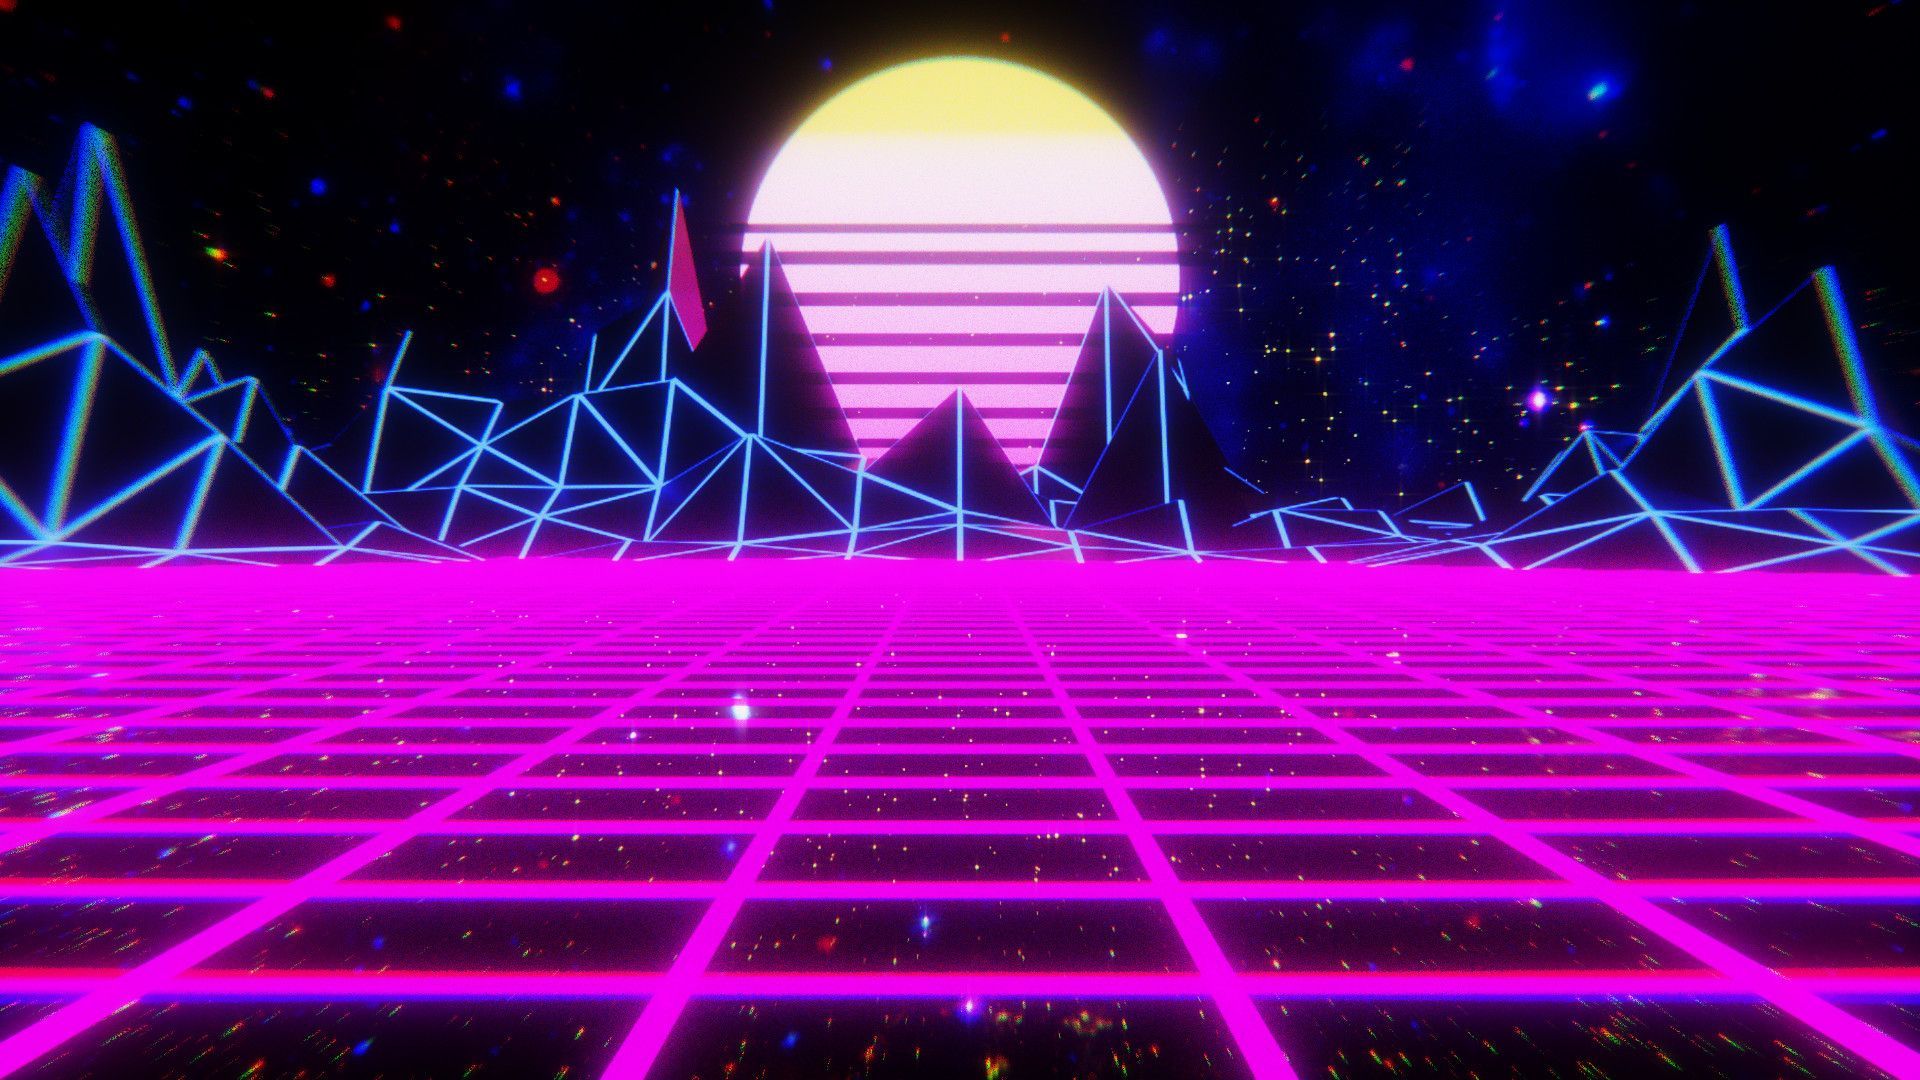 Free download Free download Synthwave Aesthetic HD Wallpaper background [ 1920x1080] for your Desktop, Mobile & Tablet. Explore Synthwave Computer Wallpaper. Background Computer, Wallpaper Computer, Computer Background